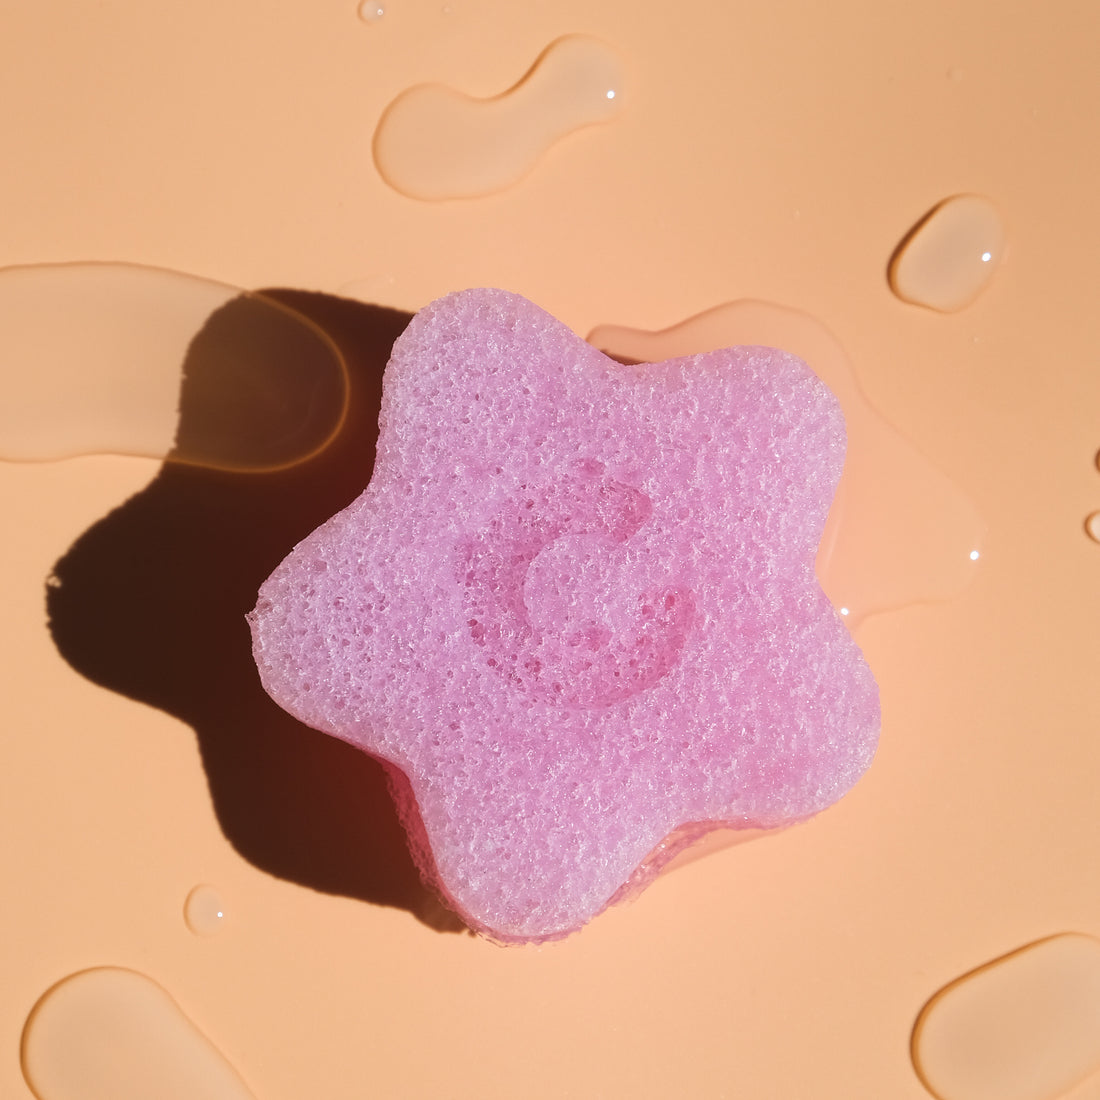 Clean Circle cherry blossom konjac facial sponge with water droplets surrounding it on orange background